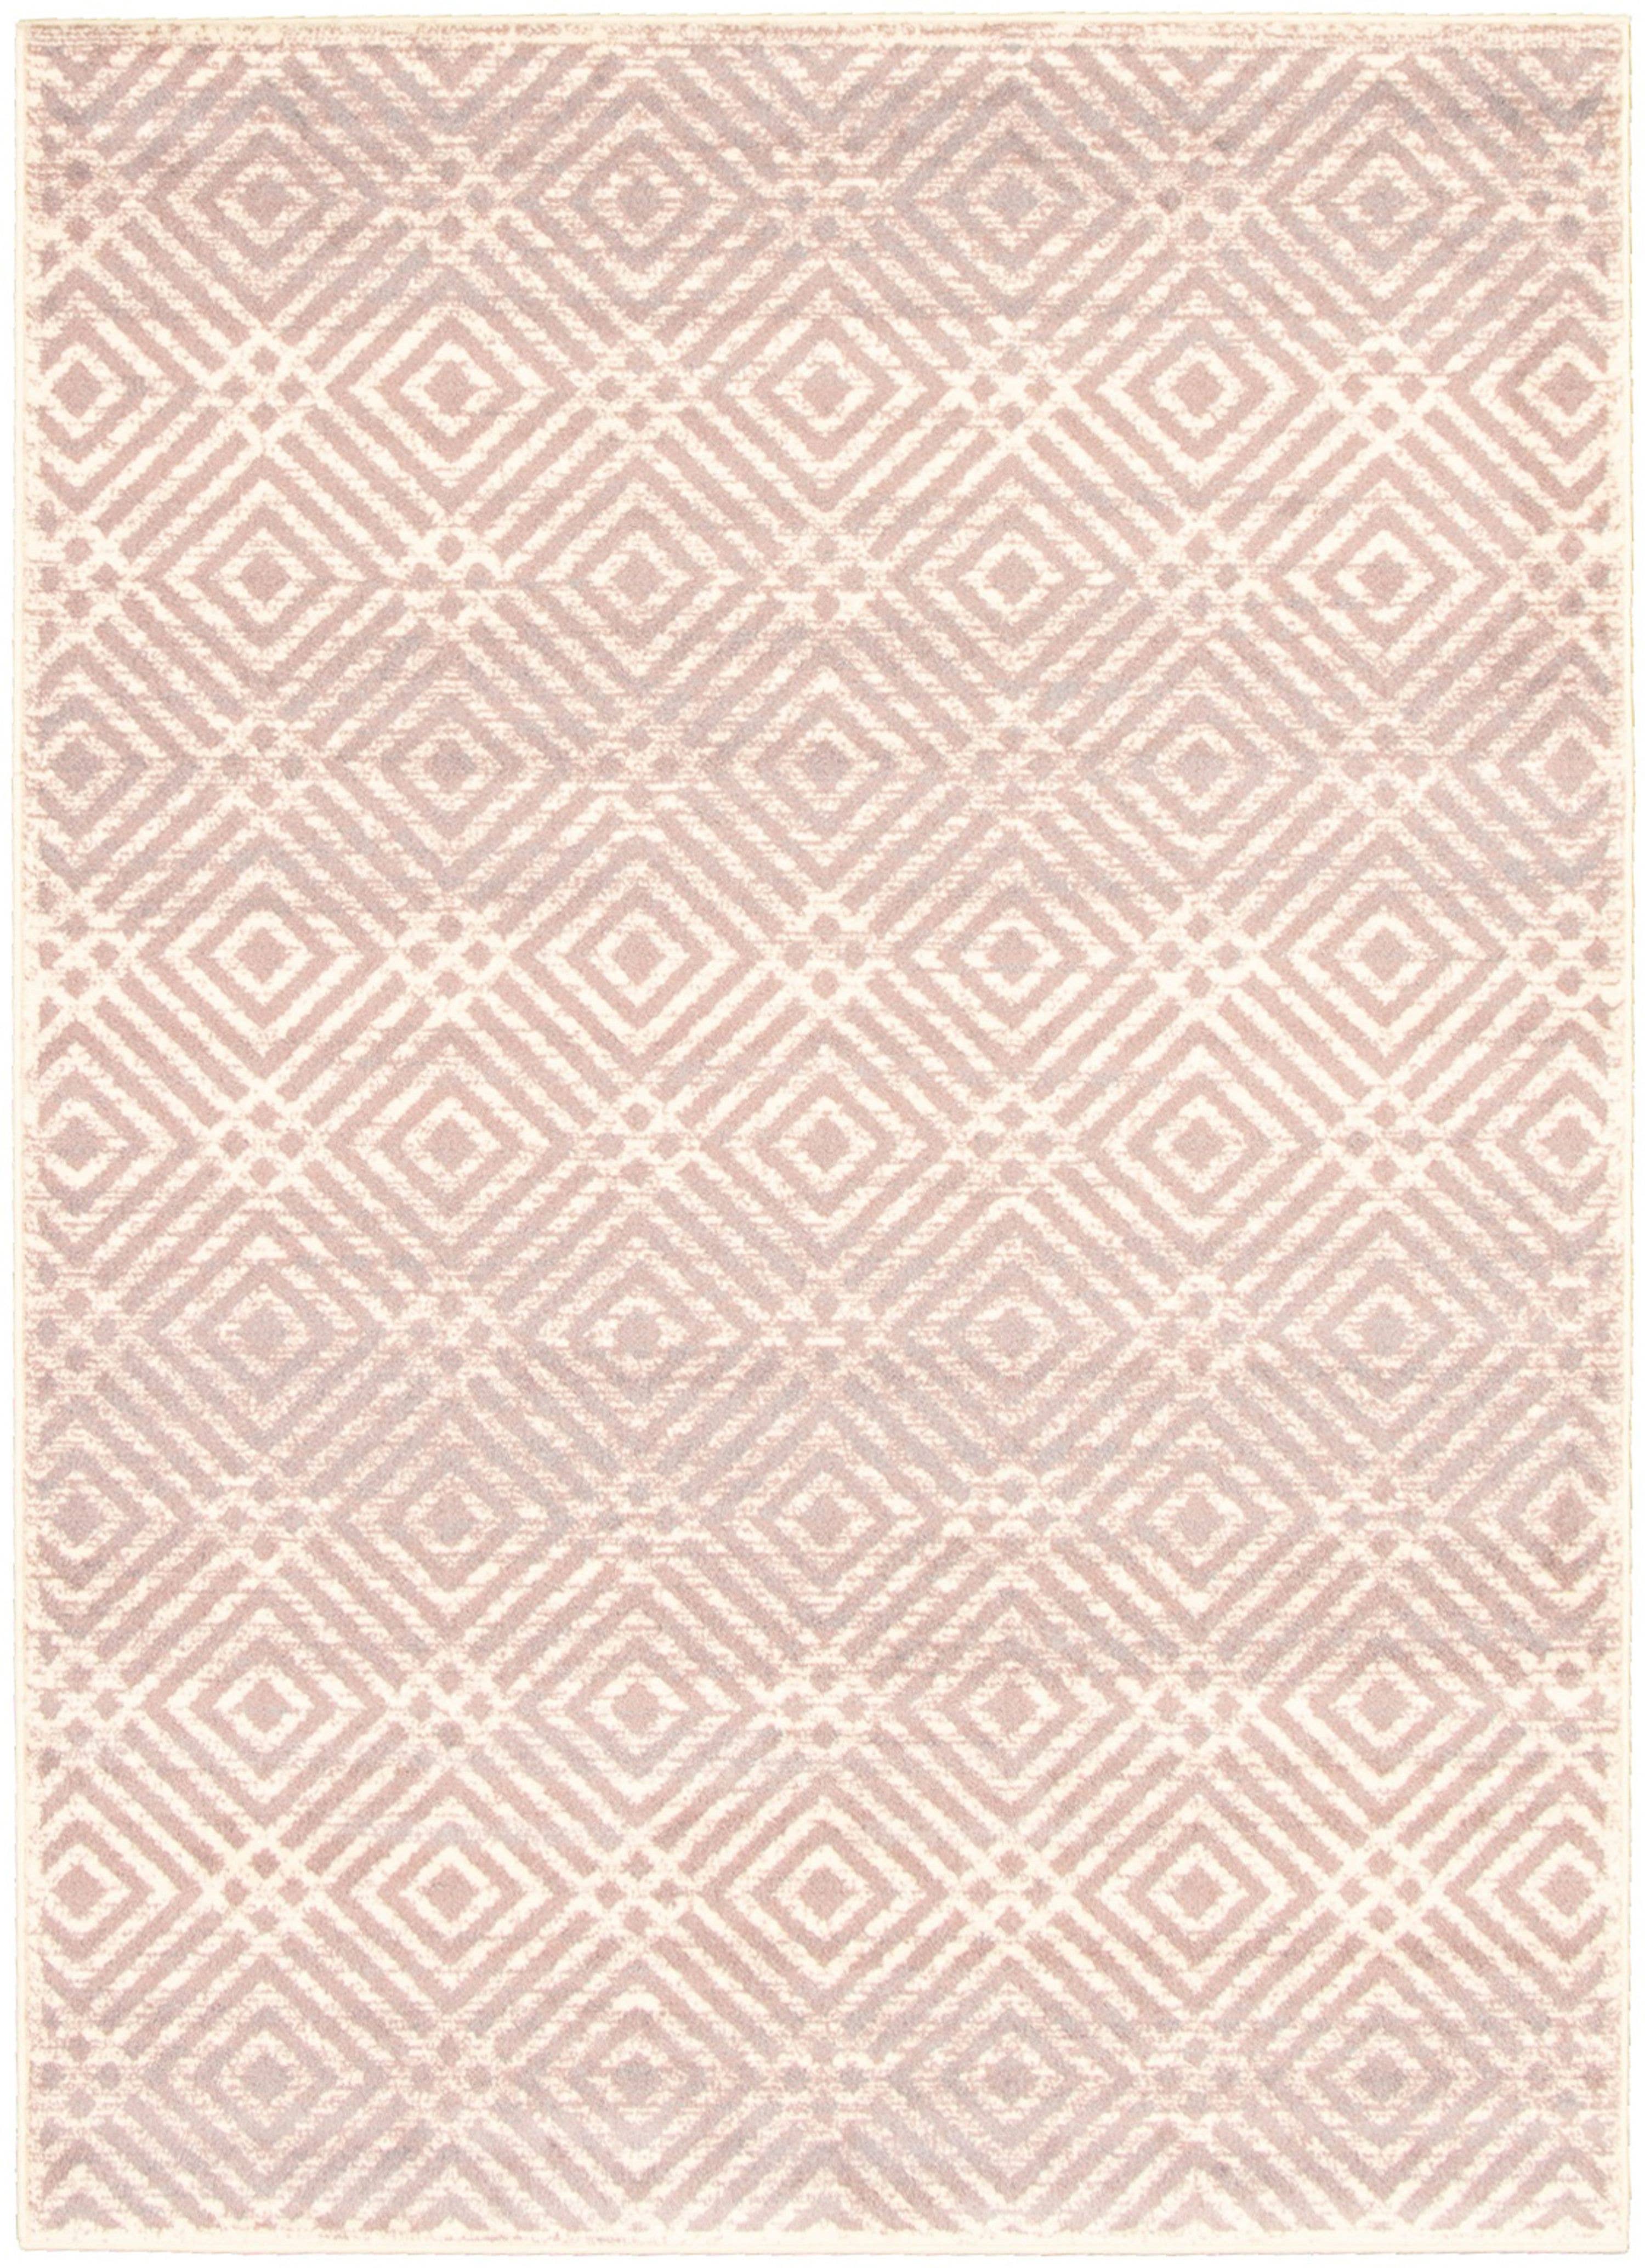 eCarpetGallery Ember Area Rugs Silver-Pink 5'3 X 7'3 